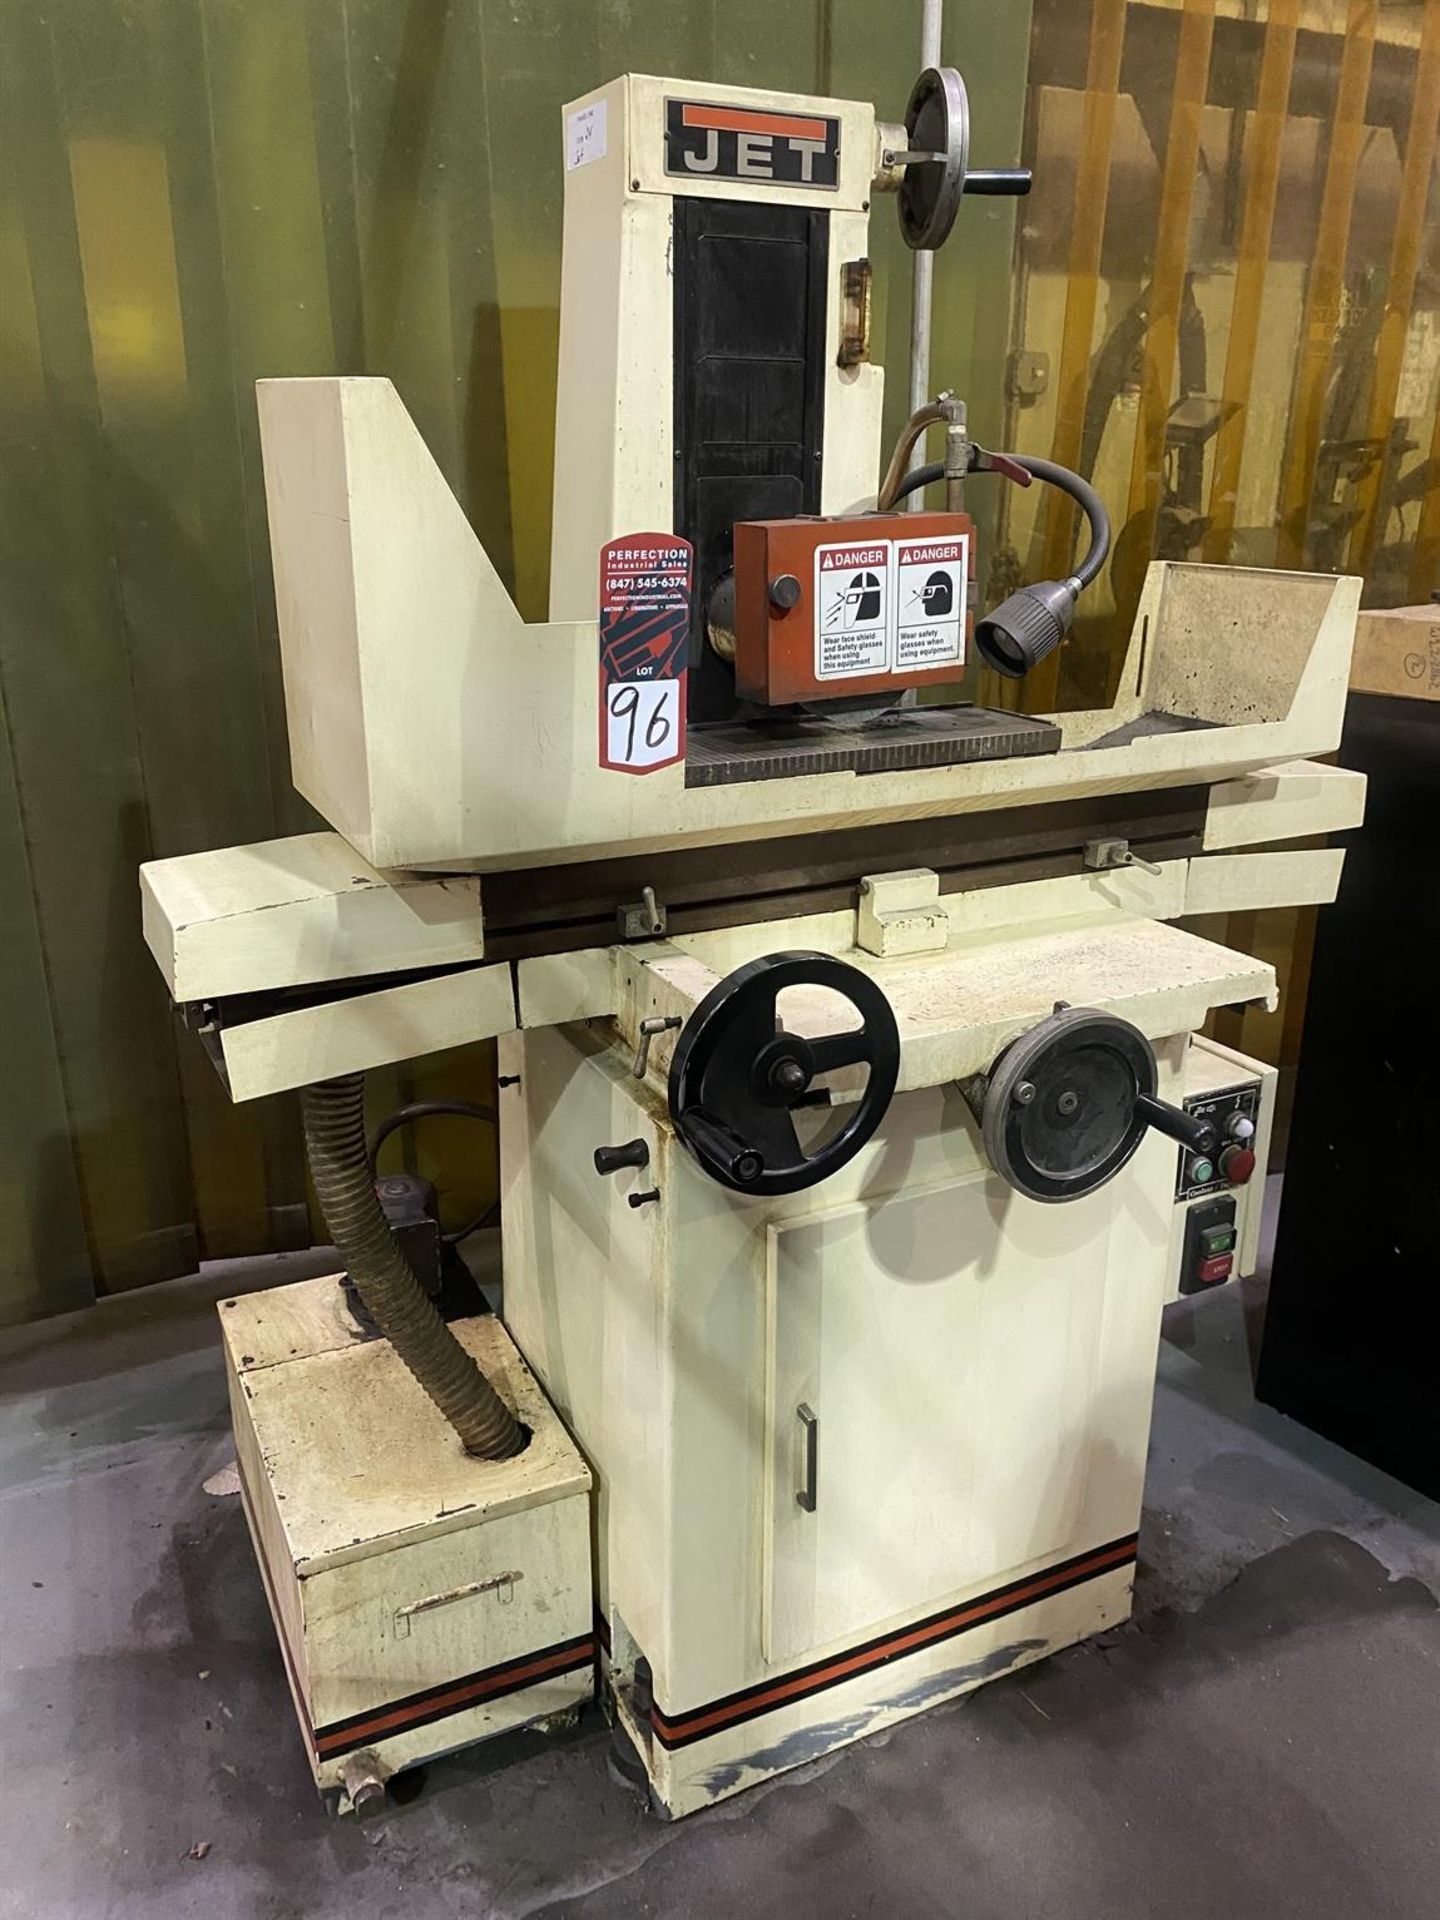 JET JPSG-618M Manual Surface Grinder, s/n 9070019, 6” x 18” Table, 9” x 7” Grinding Capacity, 20” - Image 2 of 6